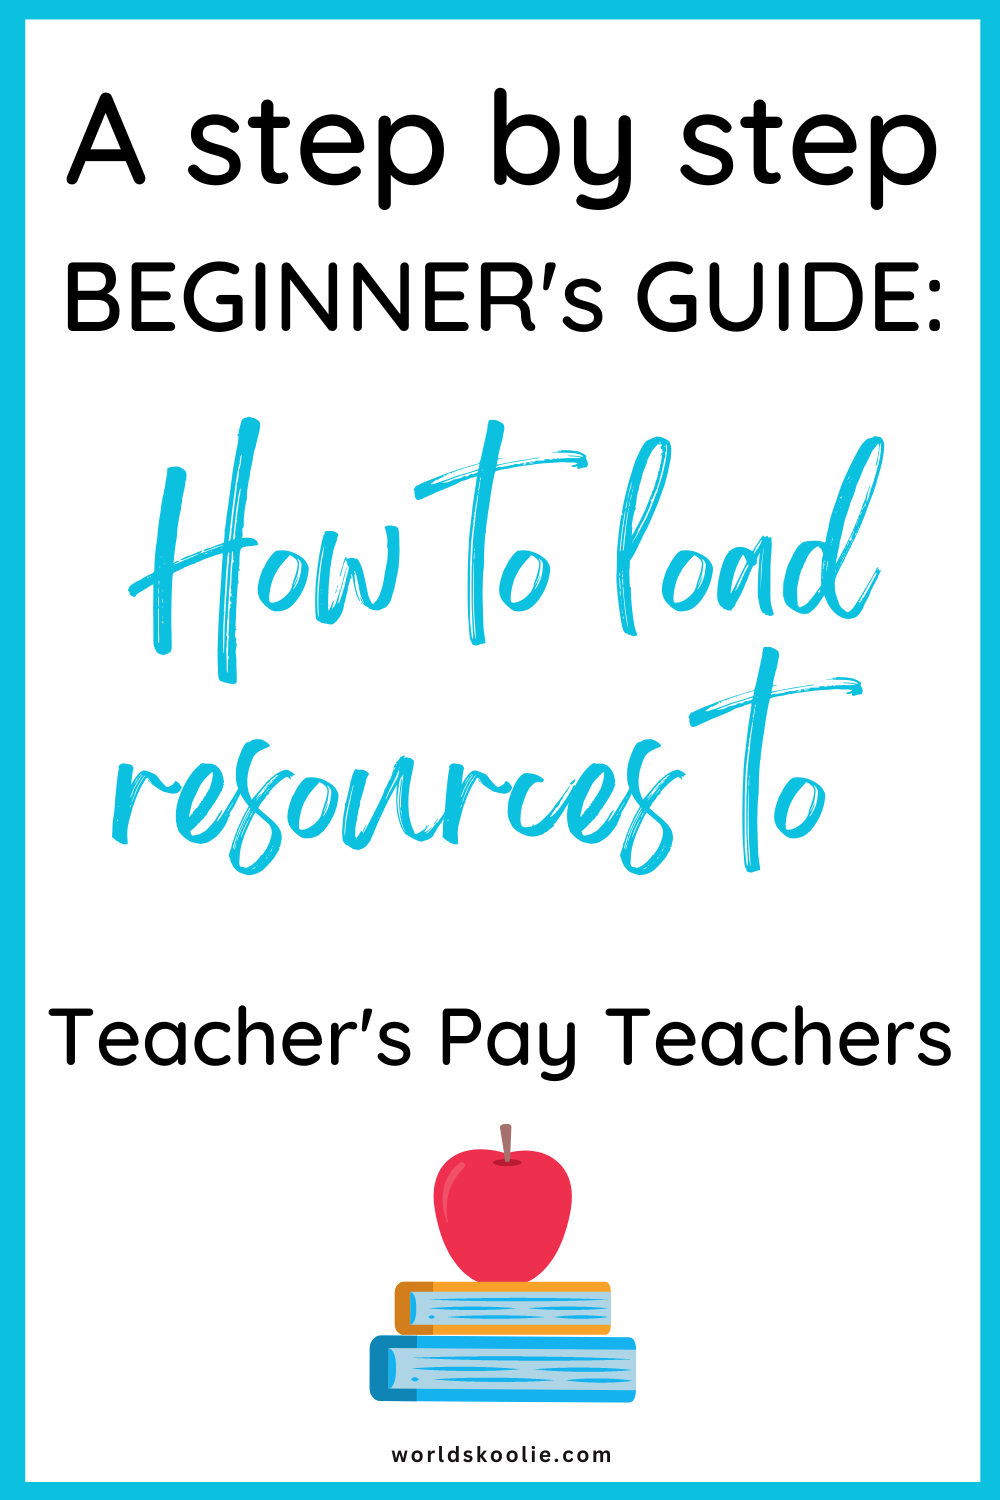 How to Get Started on Teachers Pay Teachers & Some Advanced TpT